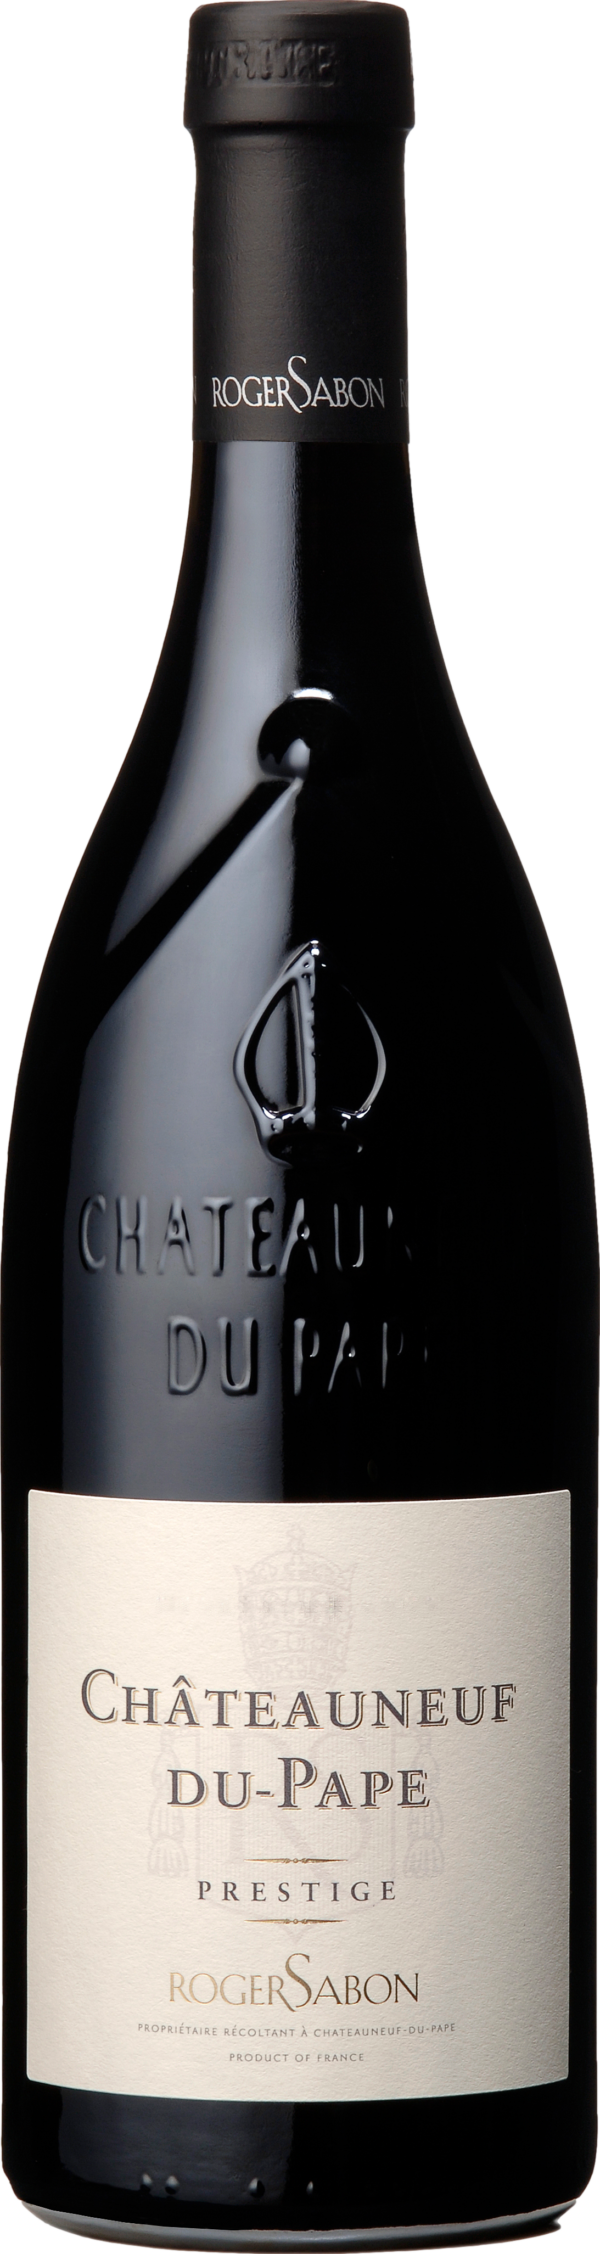 Product image of Roger Sabon Chateauneuf du Pape Prestige 2021 from 8wines